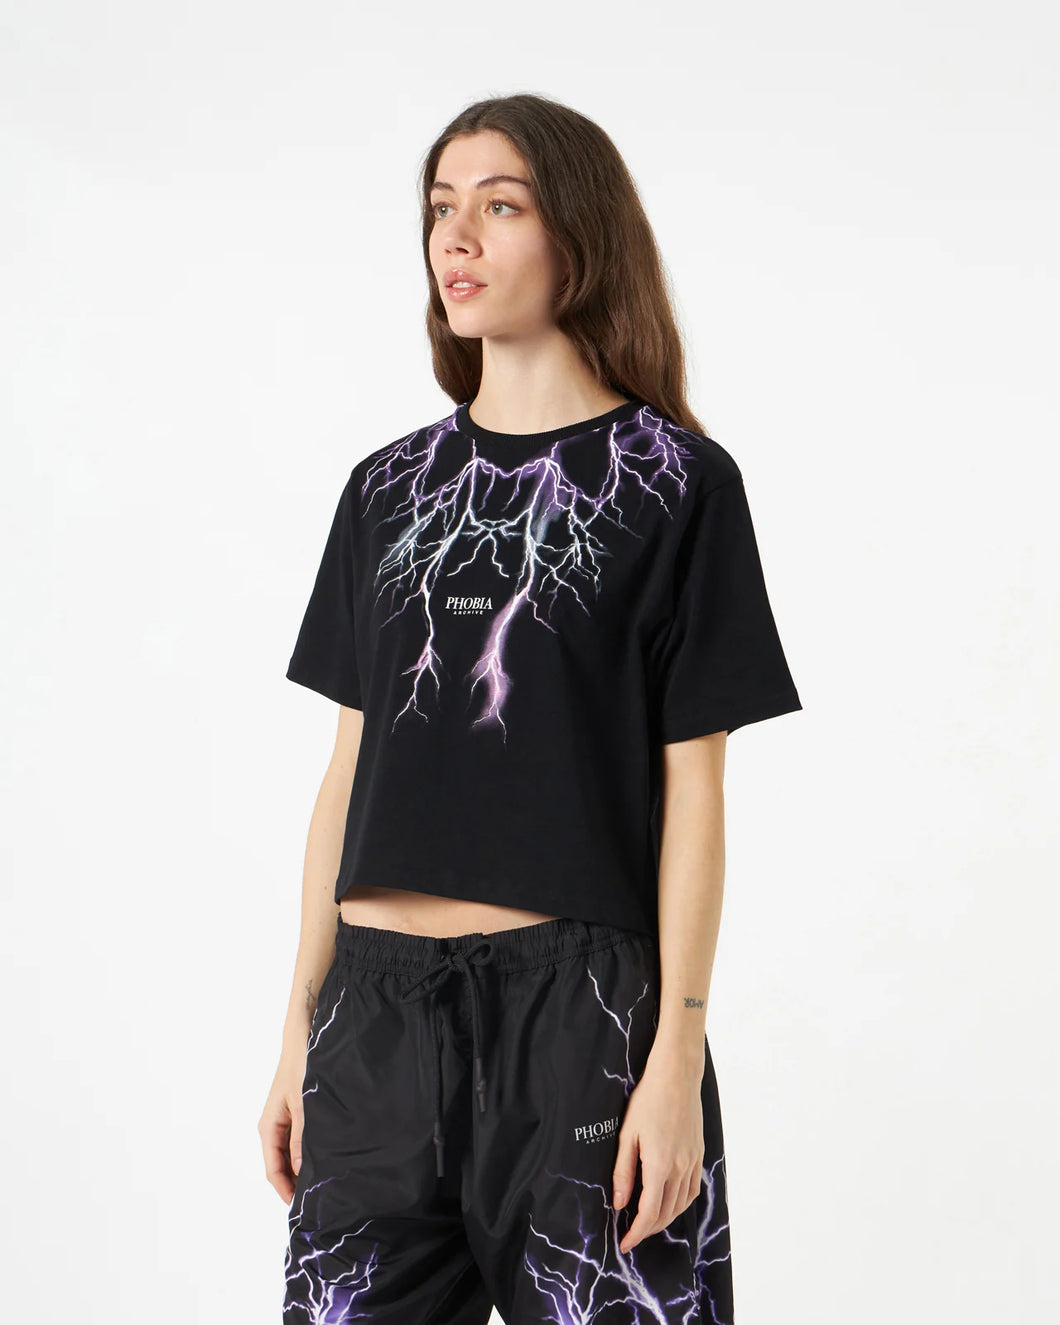 BLACK CROP T-SHIRT WITH PURPLE GREY FUXIA LIGHT